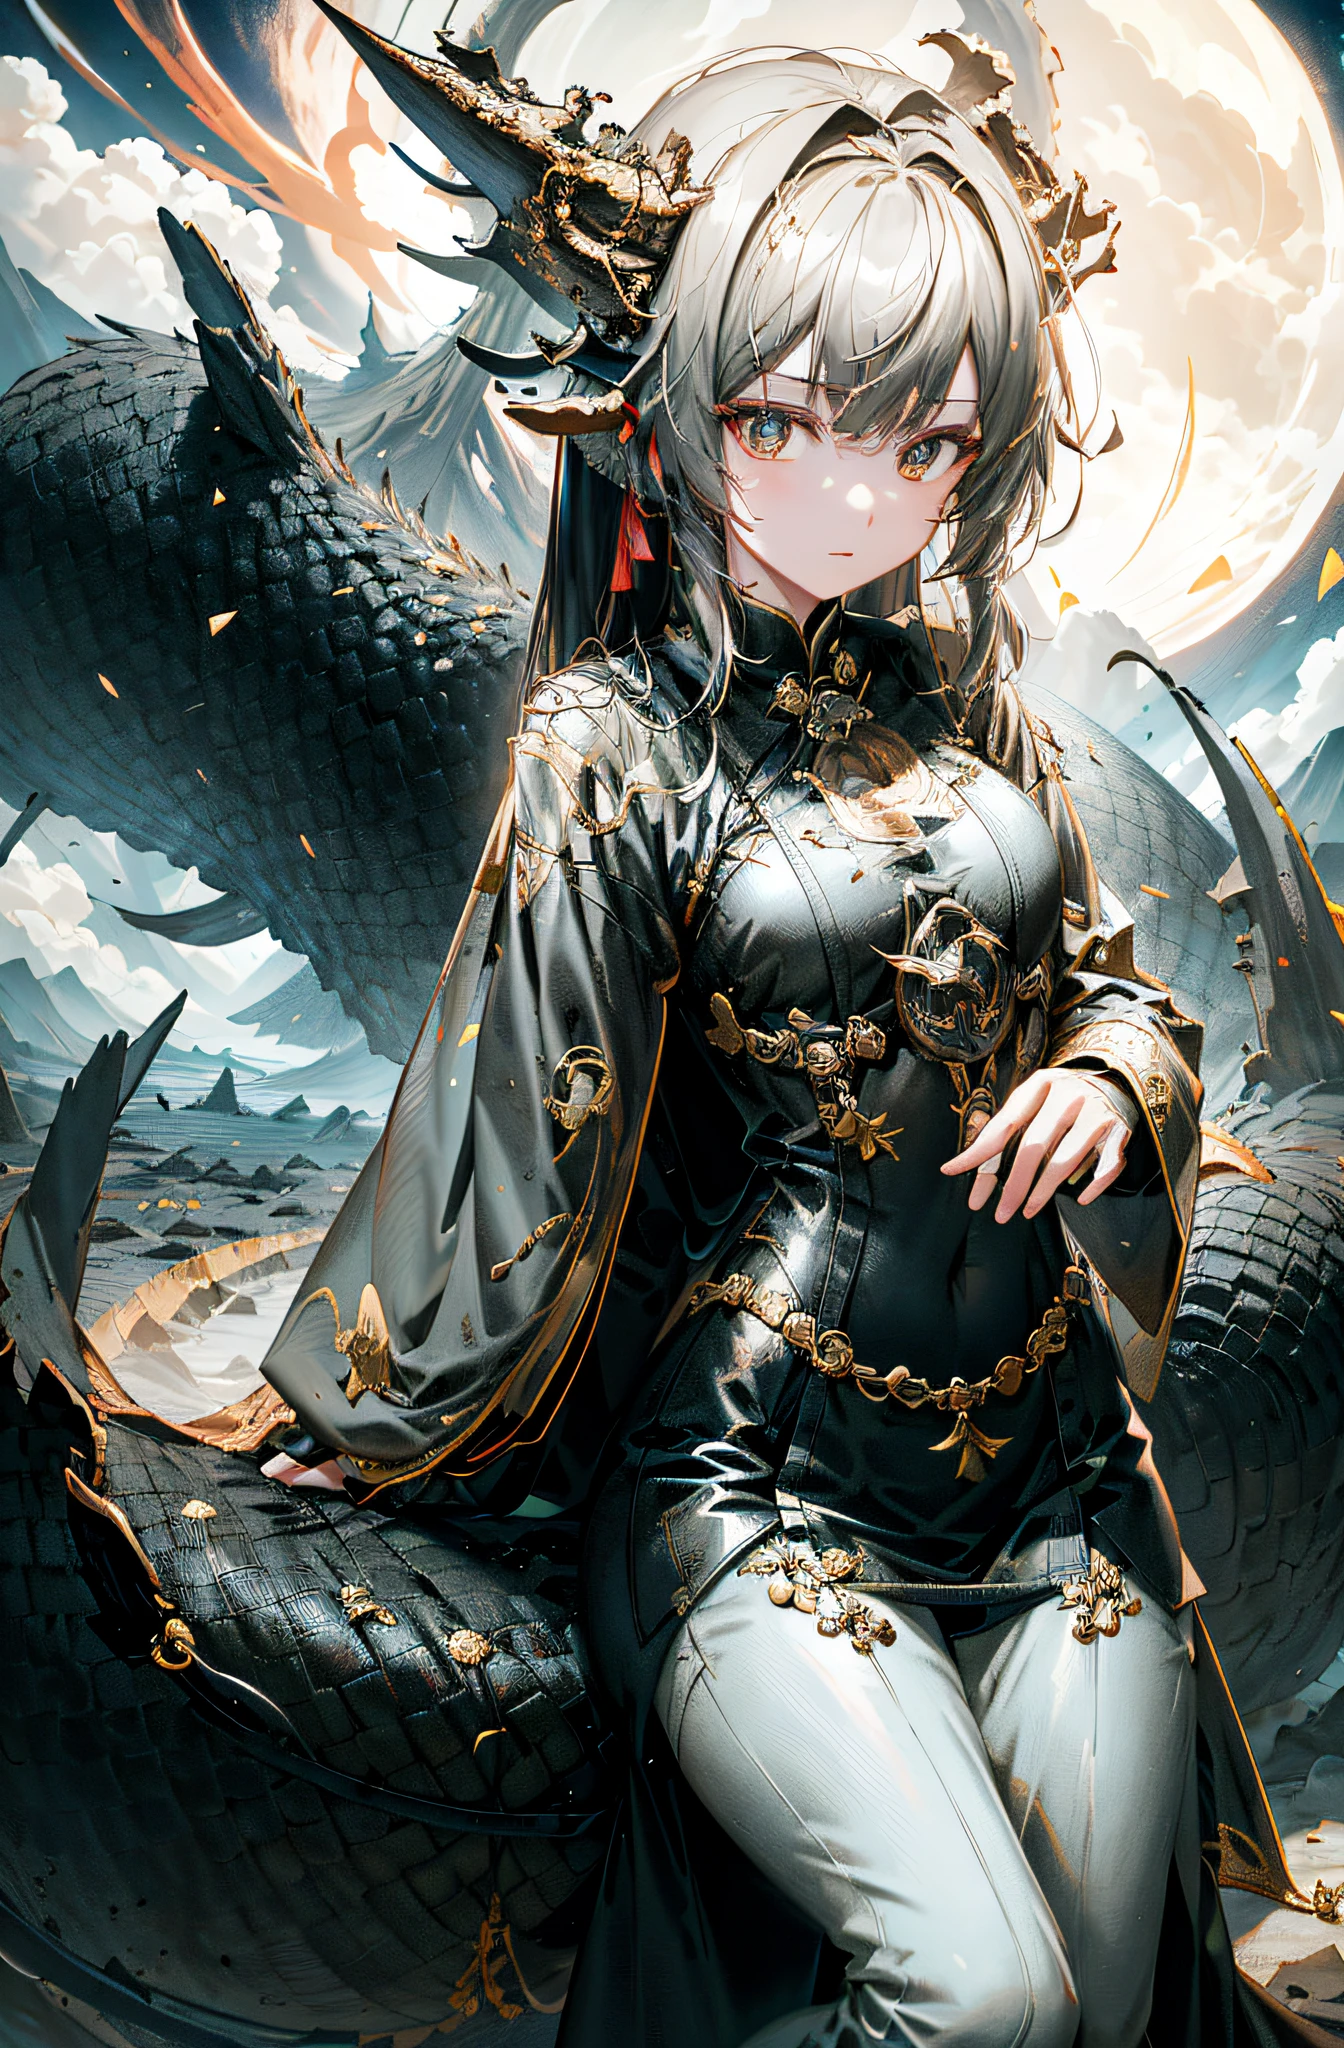 anime girl sitting on a dragon，The background is the full moon。, trending on artstation pixiv, with scaly-looking armor, by Yang J, Guweiz on ArtStation Pixiv, Guweiz in Pixiv ArtStation, Anime fantasy illustration, Detailed digital anime art, Fanart Meilleure ArtStation, drak, Keqing from Genshin Impact